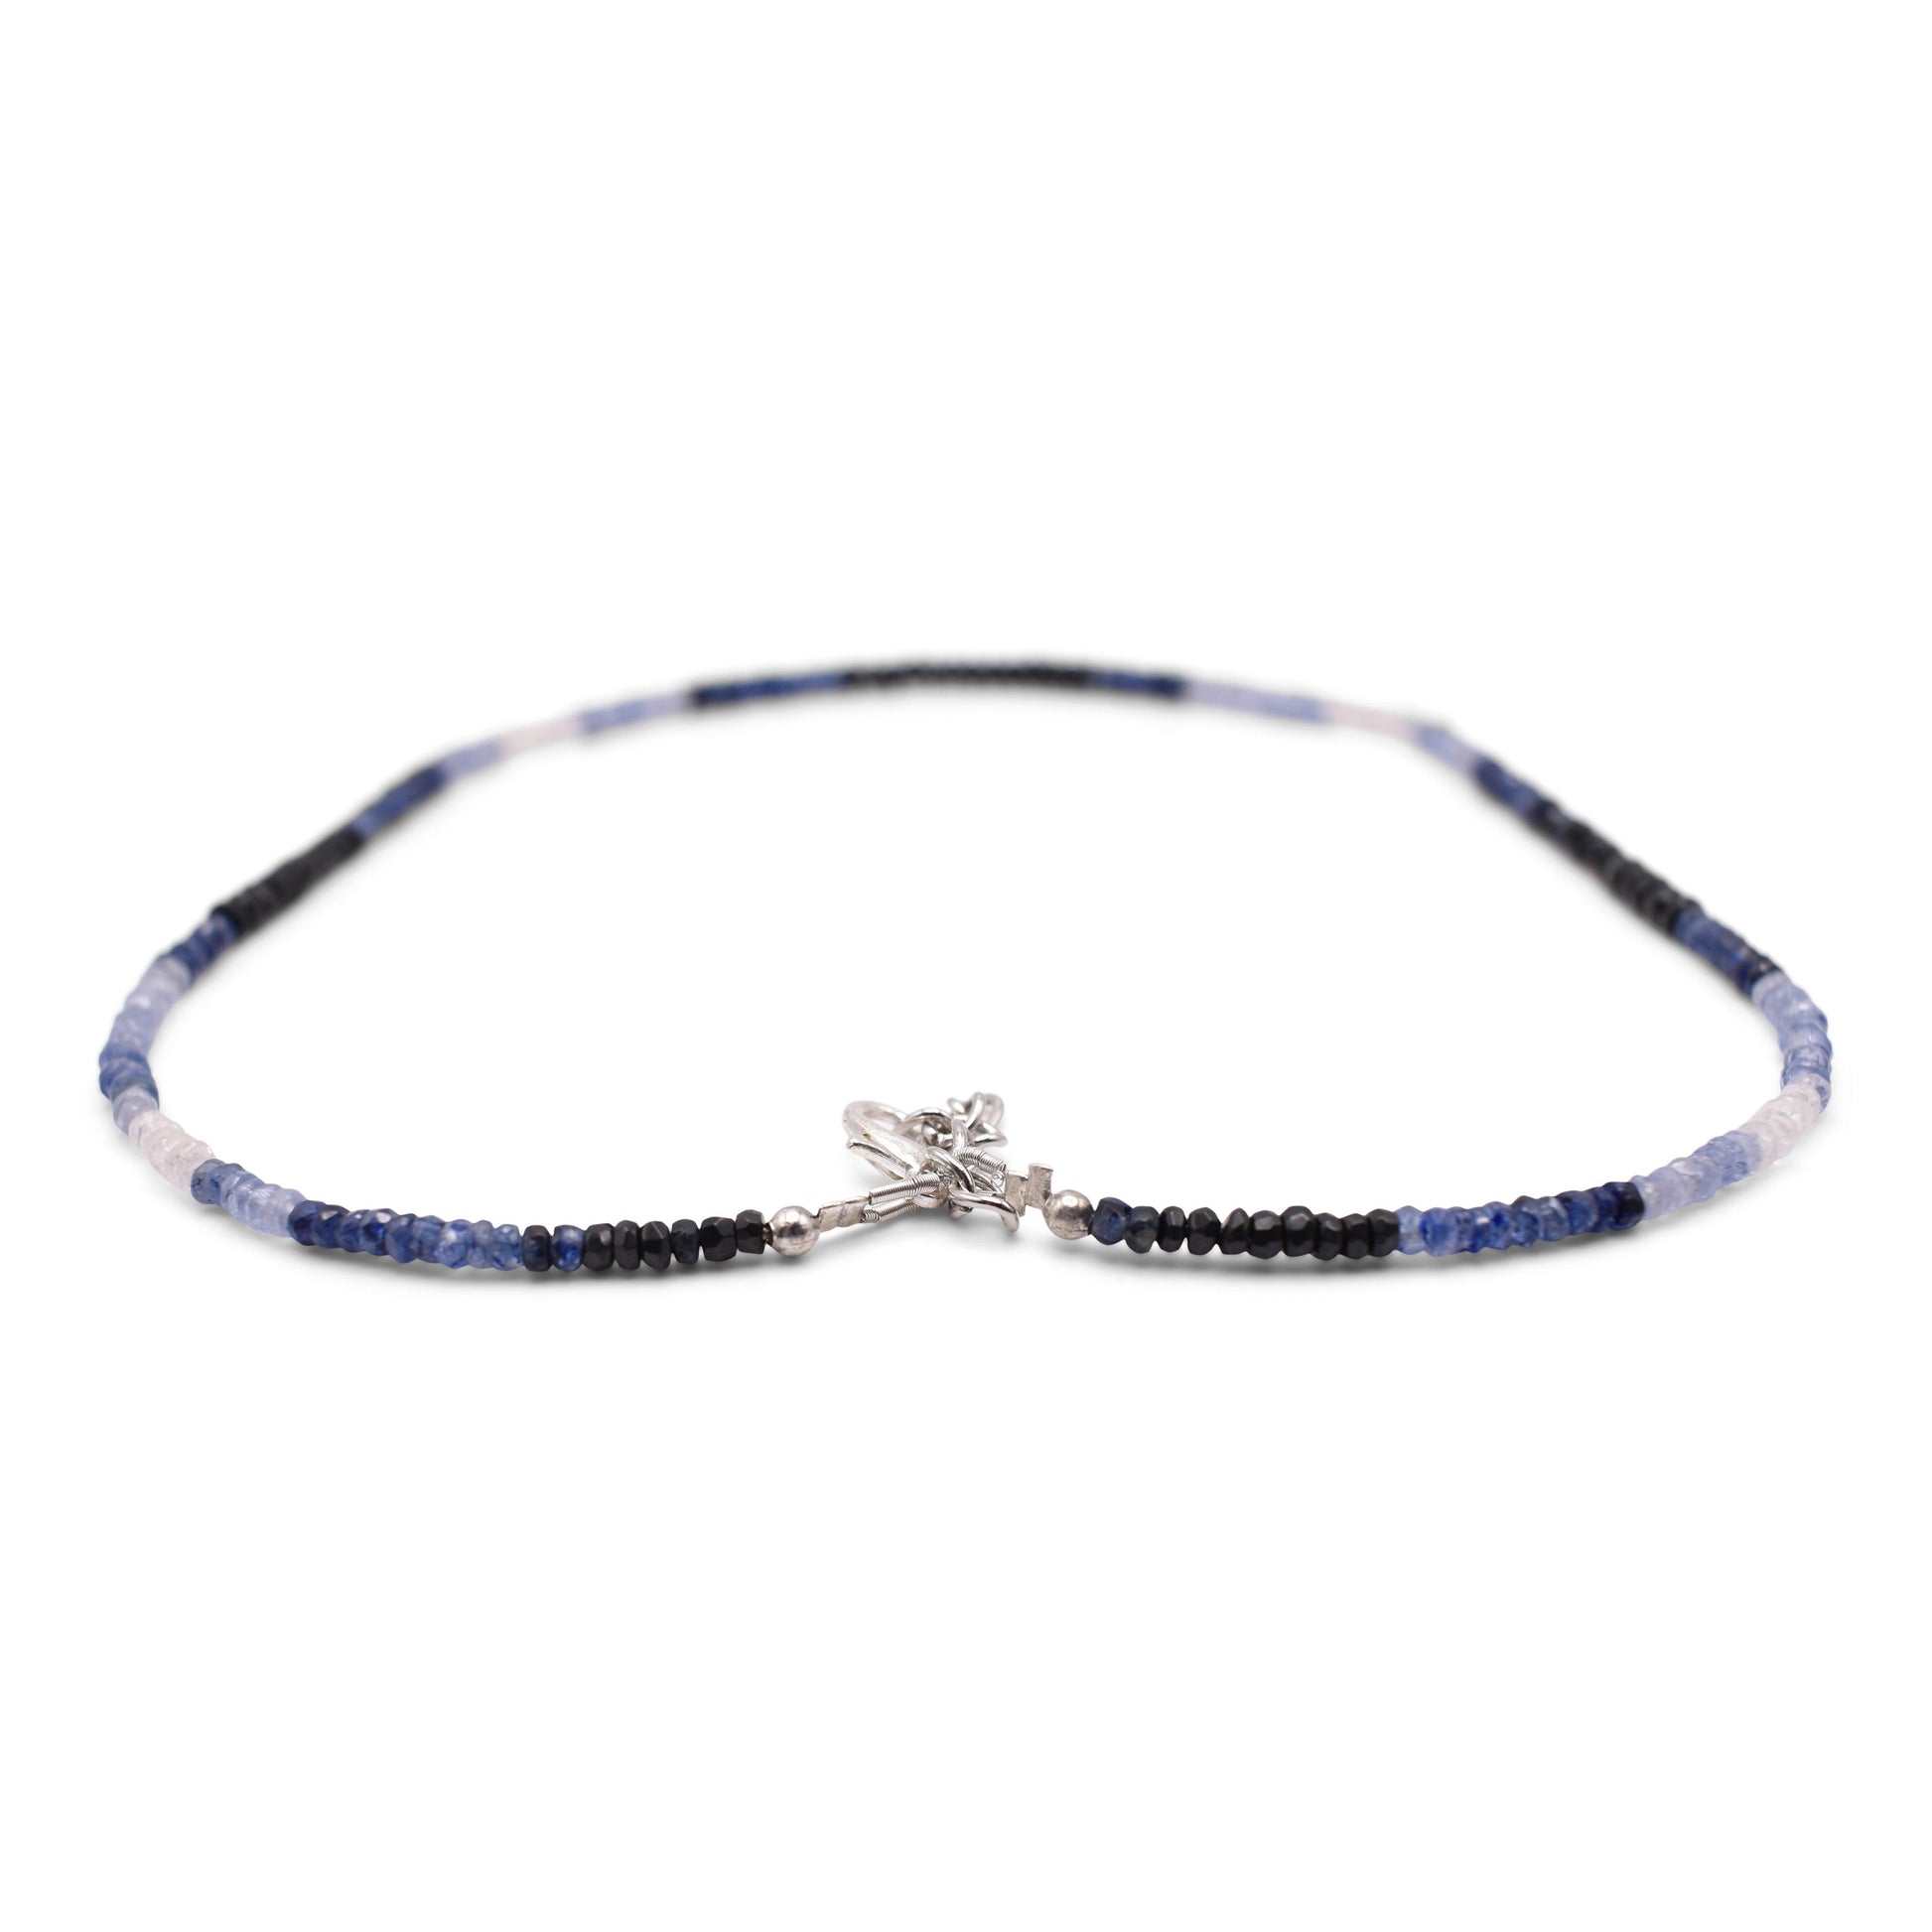 Shaded Blue Sapphire Faceted Cut Necklace - Mystic Gleam